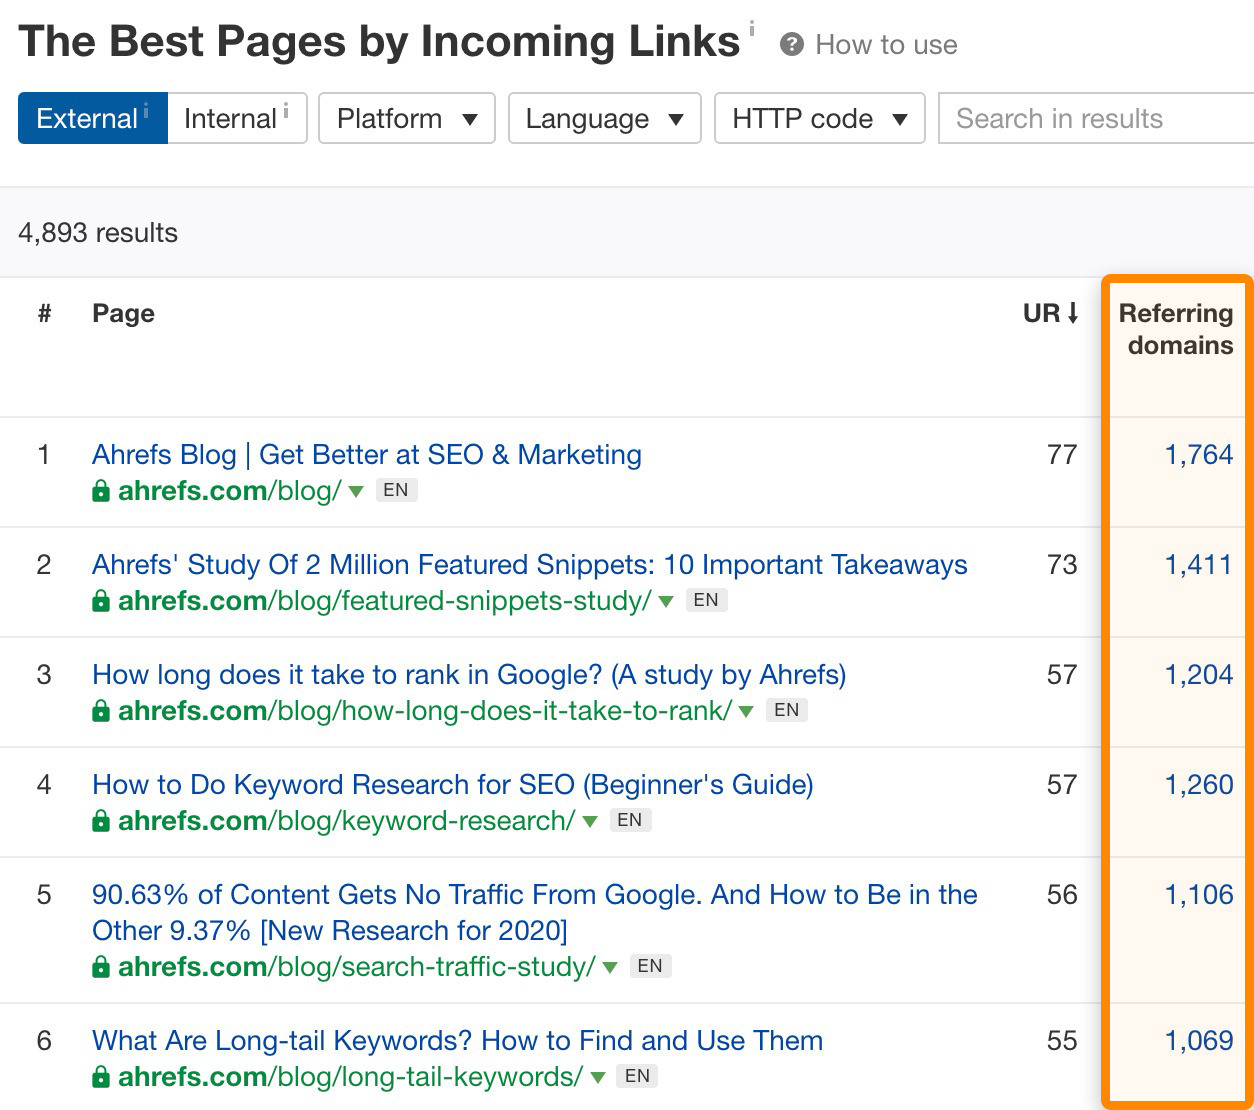 The Best Pages by incoming links